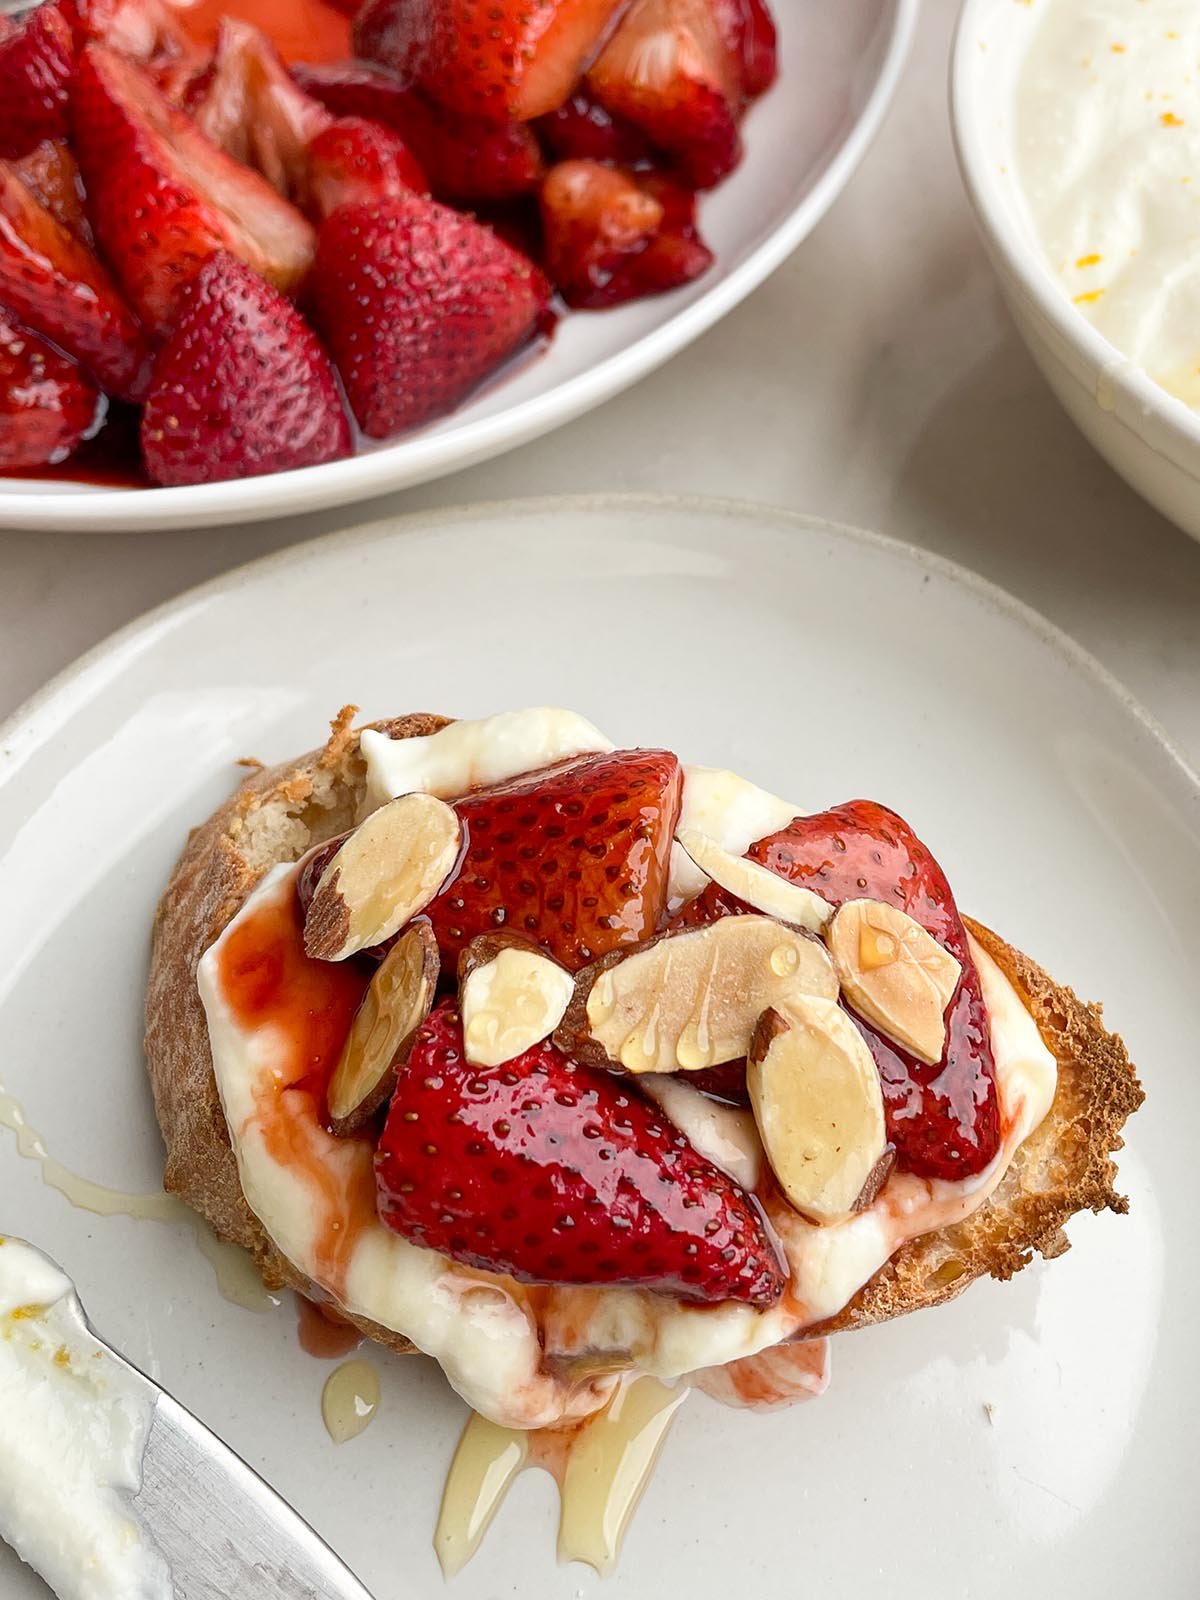 balsamic roasted strawberries, whipped ricotta and toasted almonds on toasted bread